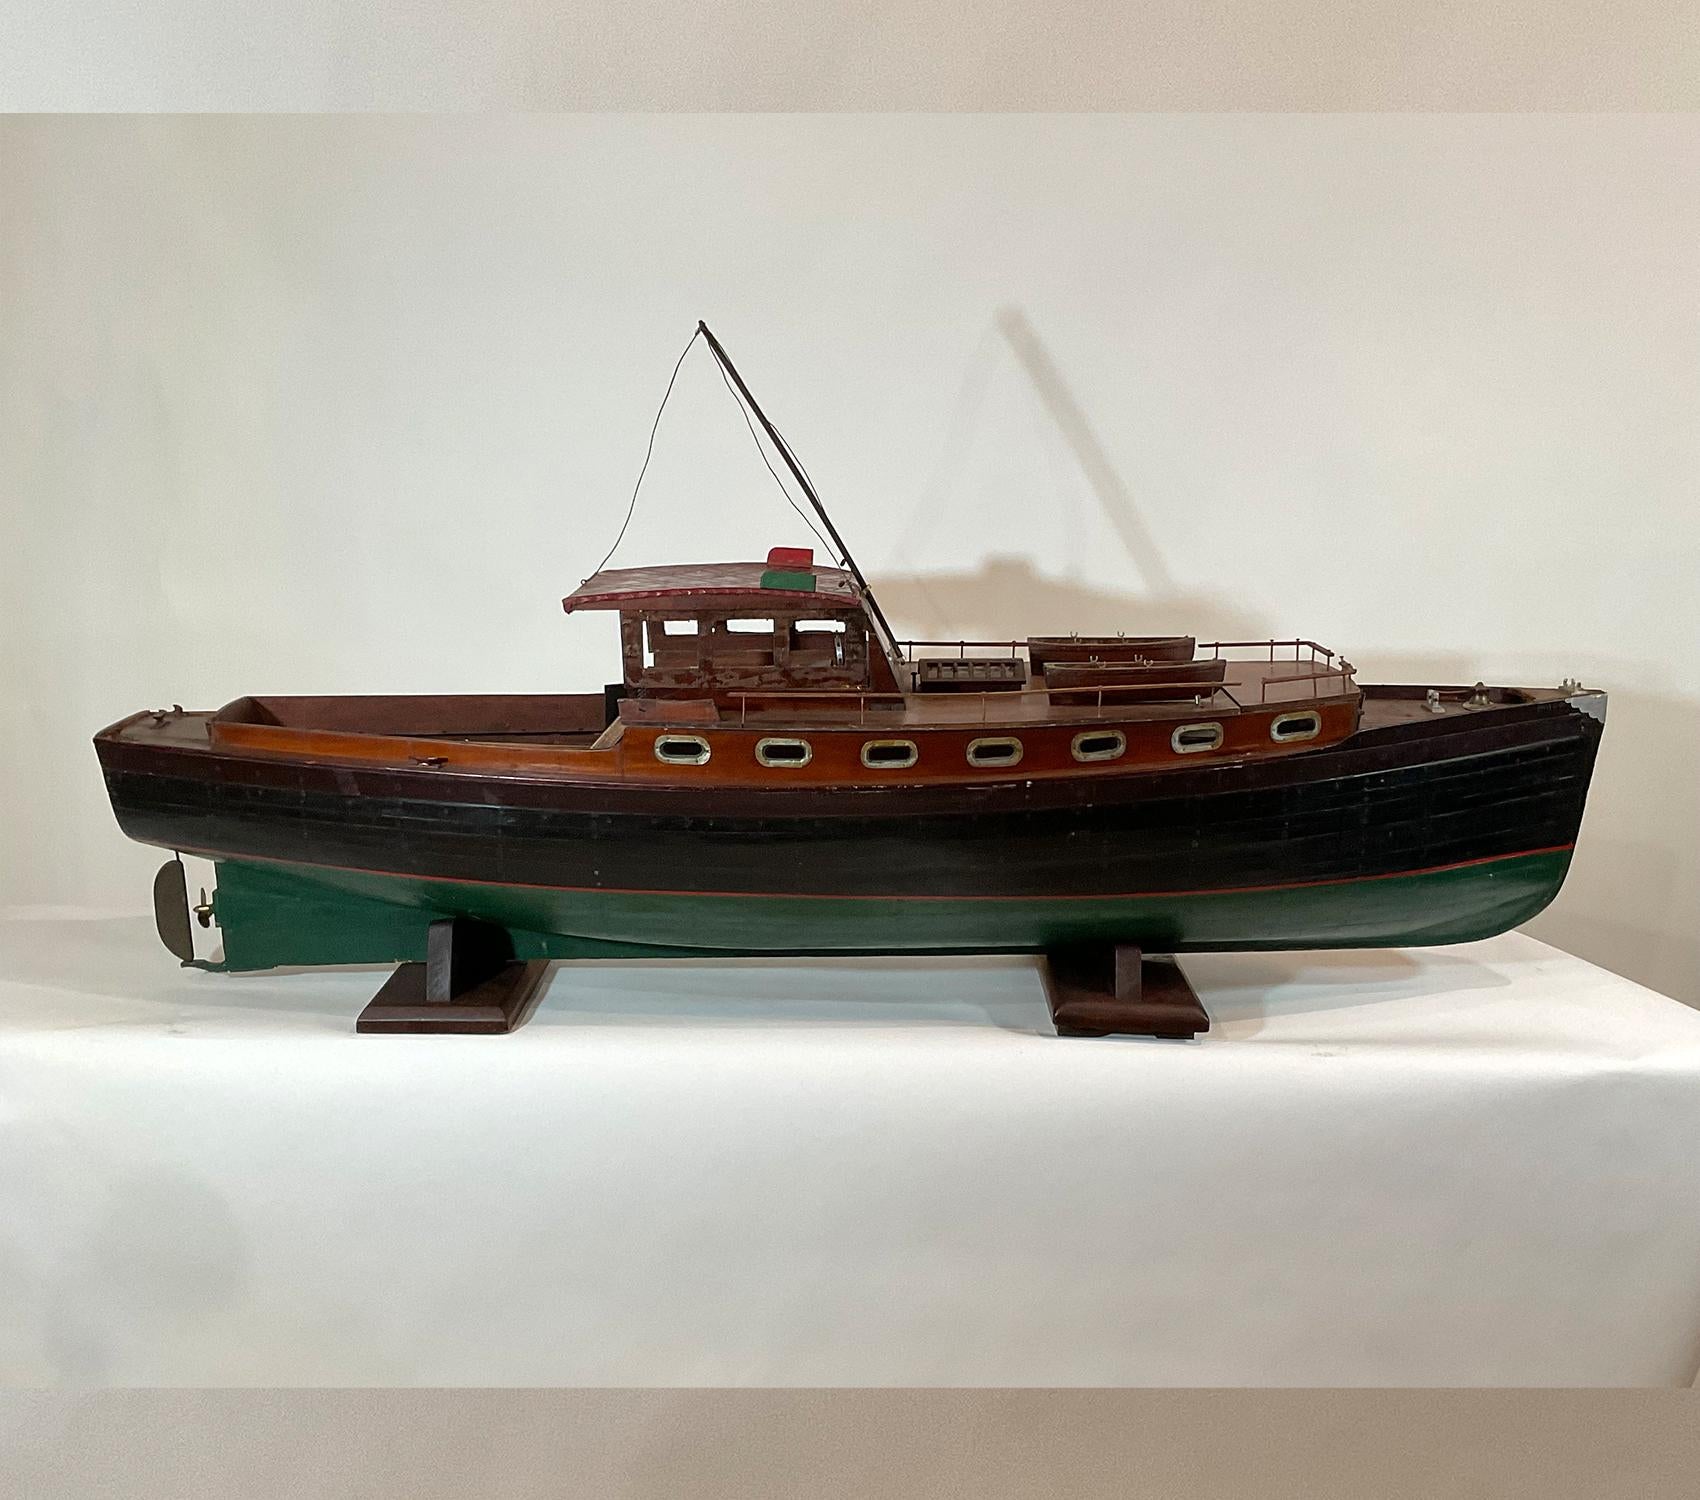 Antique model of the cabin cruiser “Waco”. Planked hull and deck. Great cabin work with portholes, flag, helm, benches, etc. Classic yacht model with great character. Big and beautiful classic Americana.

Weight: 25 LBS
Overall Dimensions: 28” H